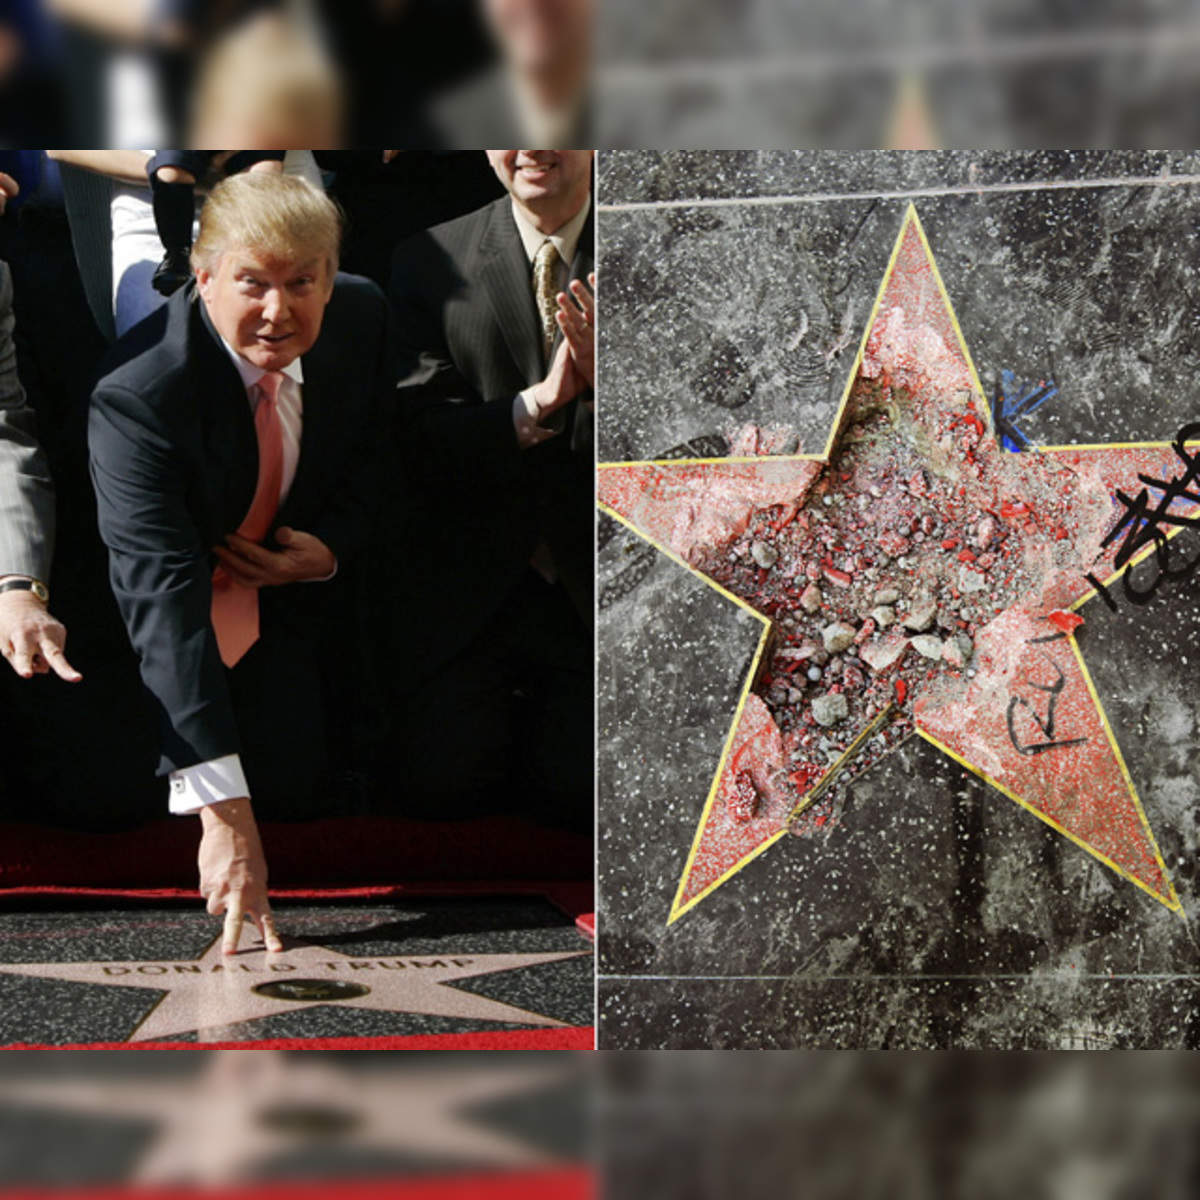 miljøforkæmper offer spade West Hollywood City Council wants to remove Donald Trump's Walk of Fame star  - The Economic Times